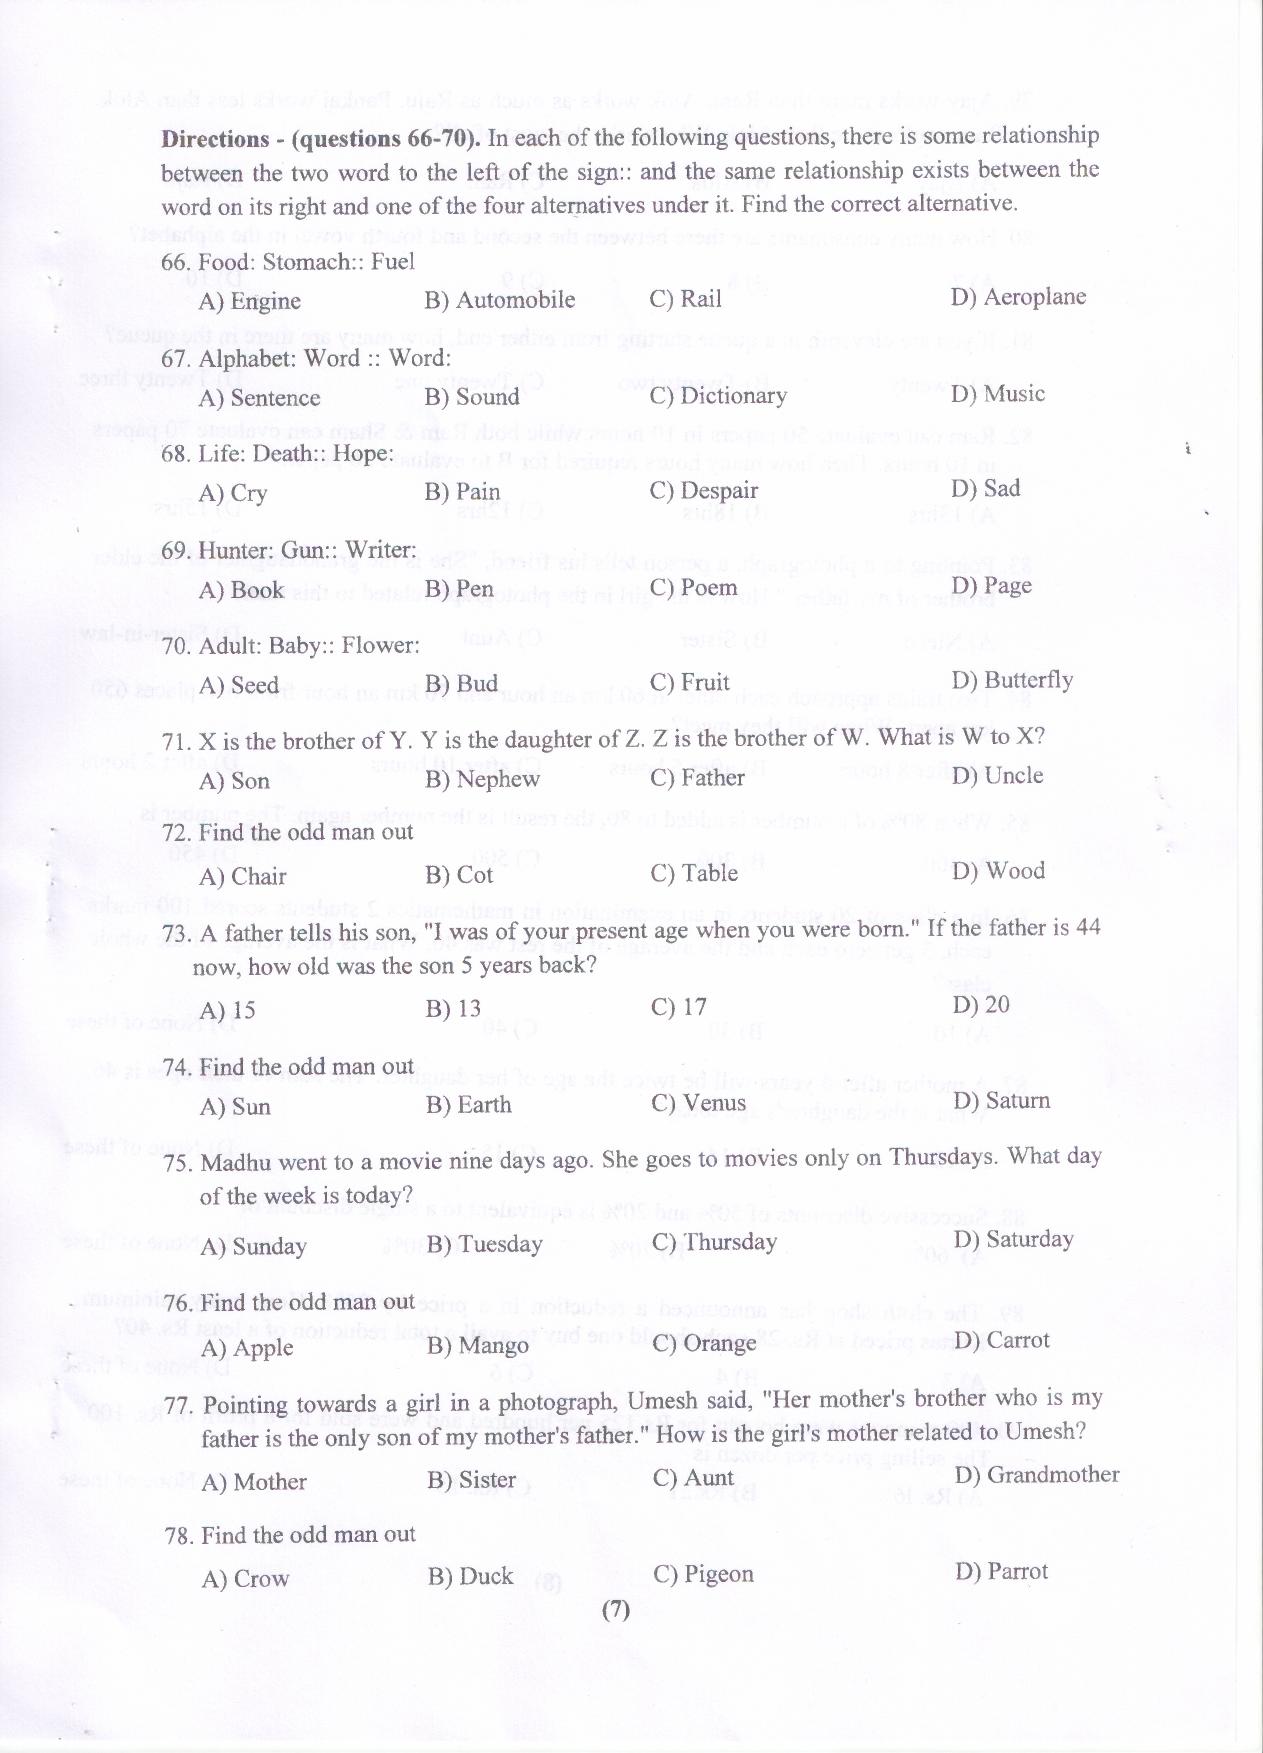 PU MET 2015 Question Booklet with Key - Page 8